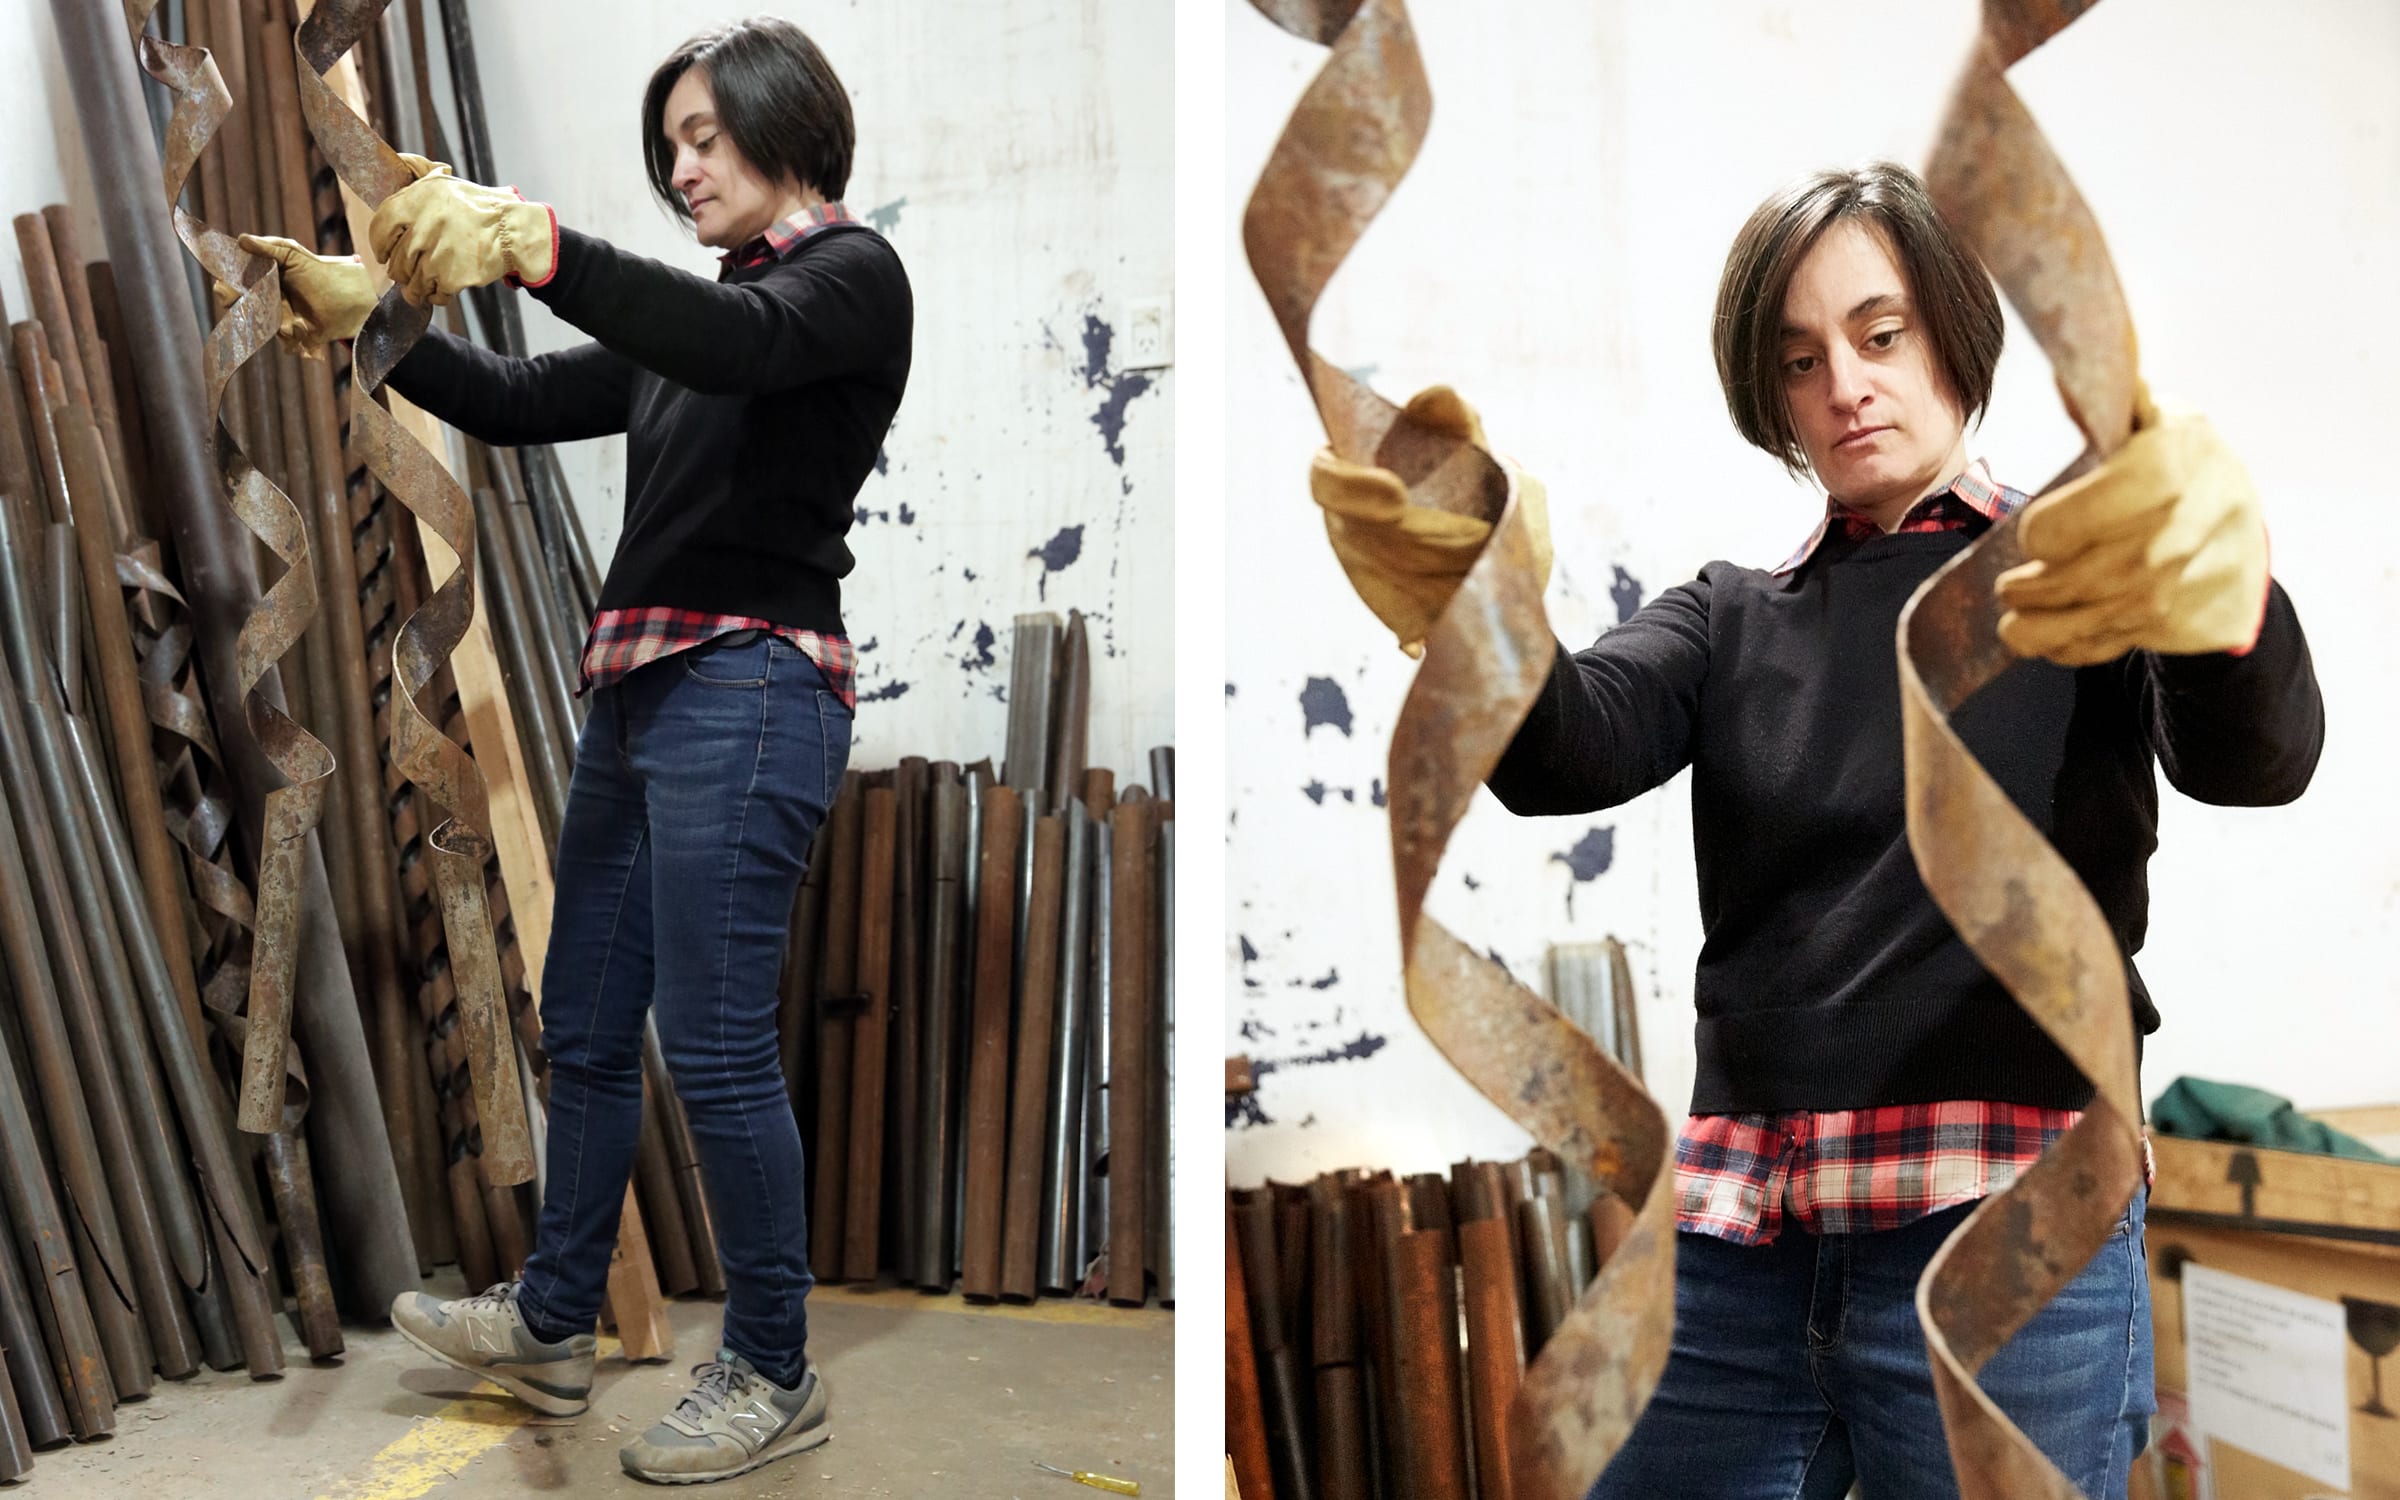 The artist, who often works with construction materials, examines metal components in her studio. Photos by Mani Gatto.